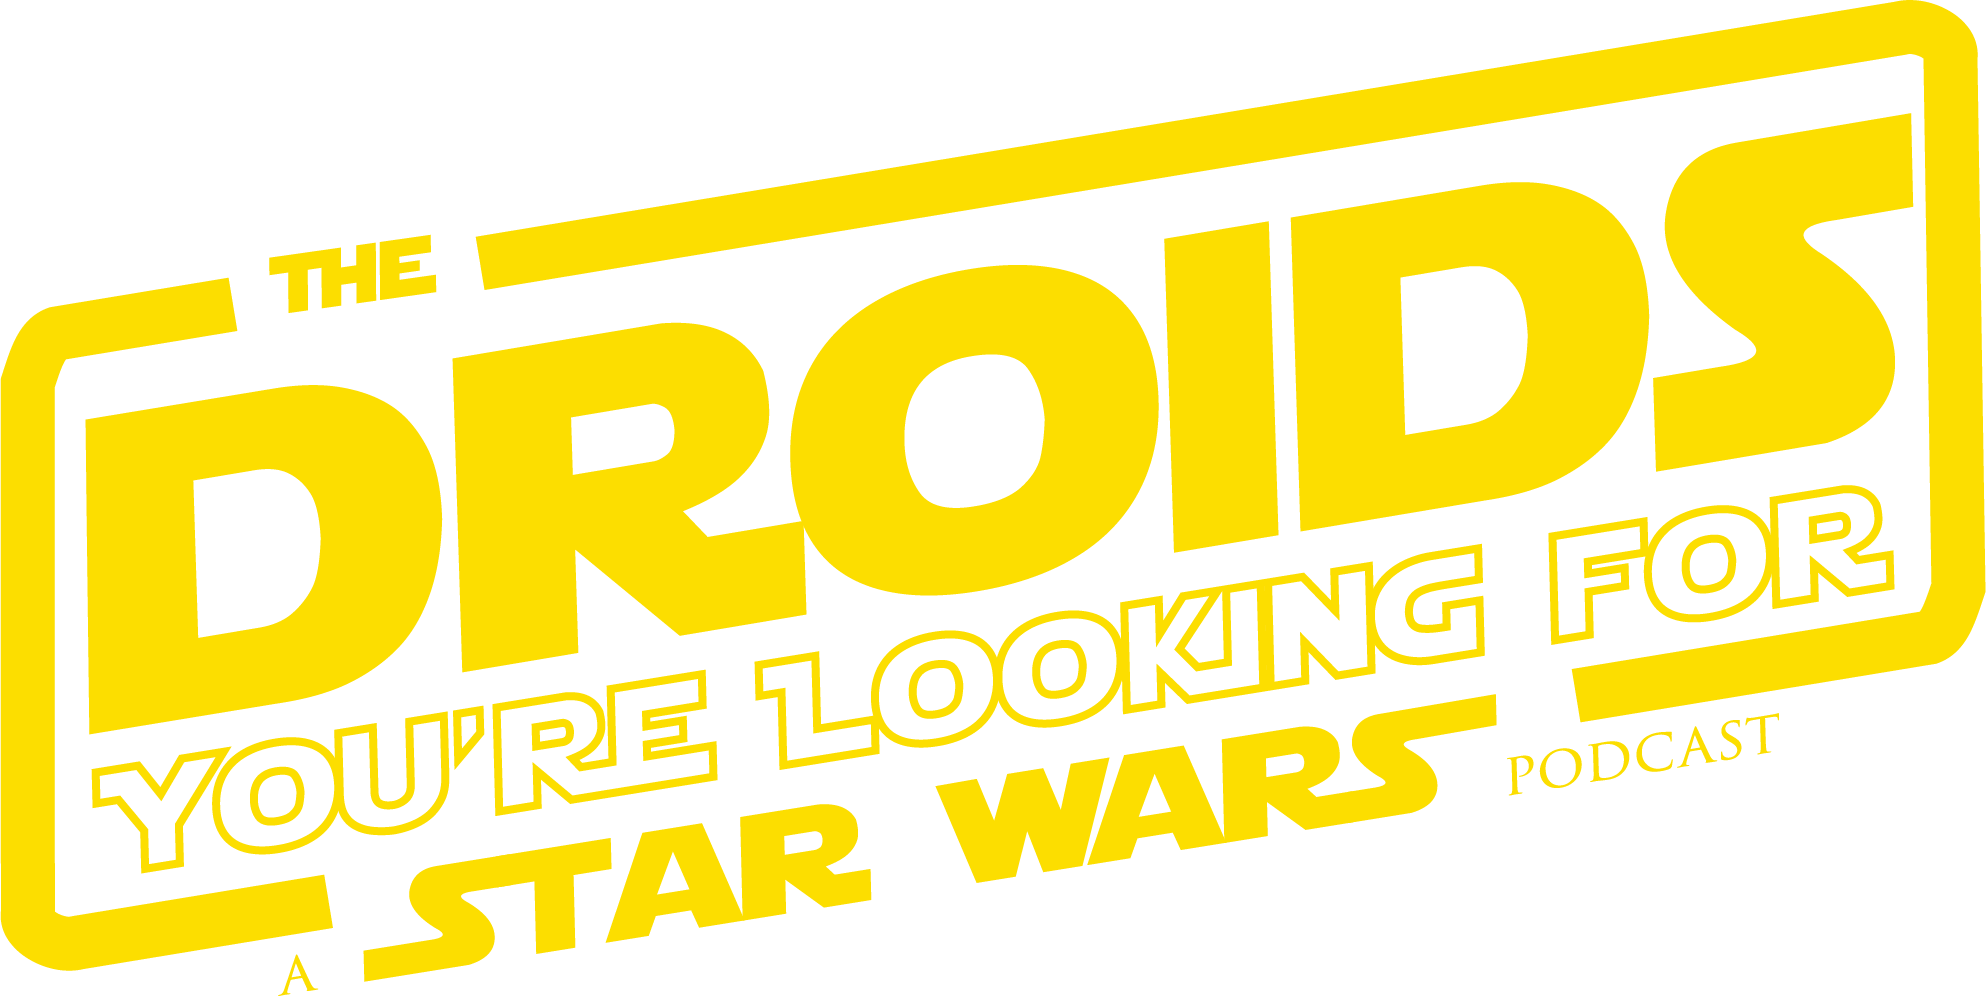 The Droids You're Looking For: A Star Wars Podcast